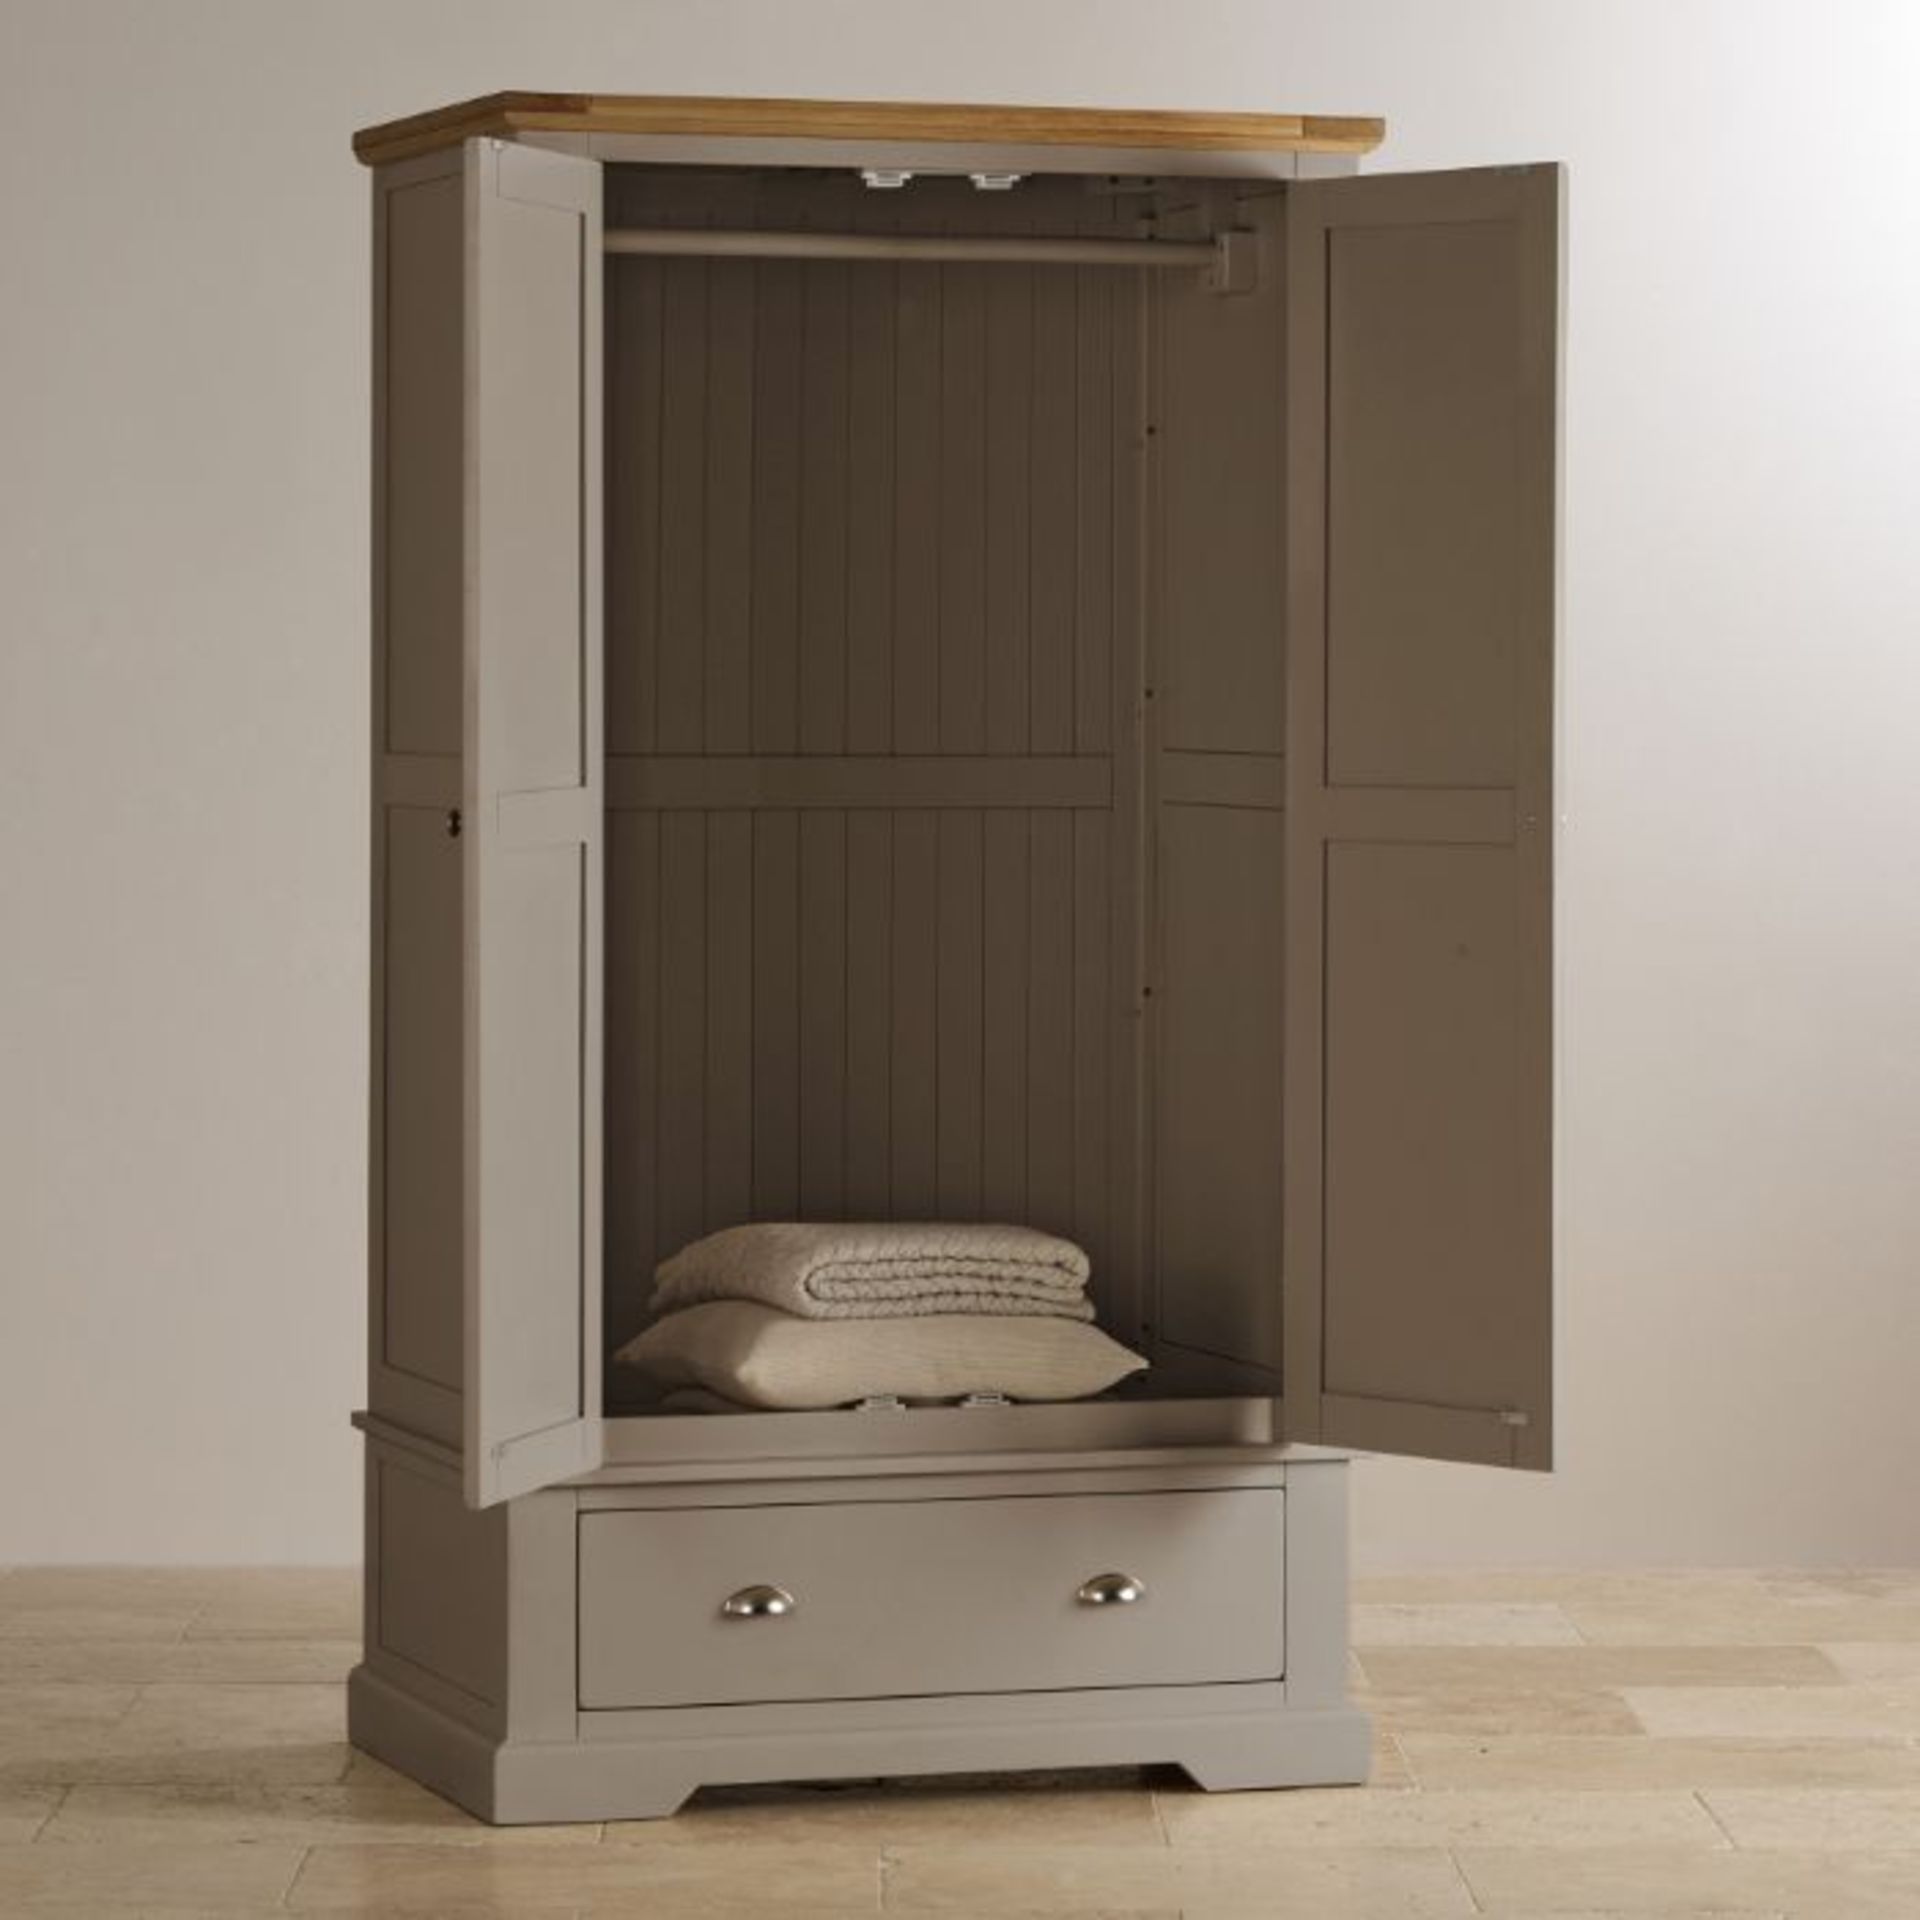 Oak Furnitureland St Ives Natural Oak And Light Grey Painted Double Wardrobe RRP ?694.99 The St Ives - Image 6 of 7